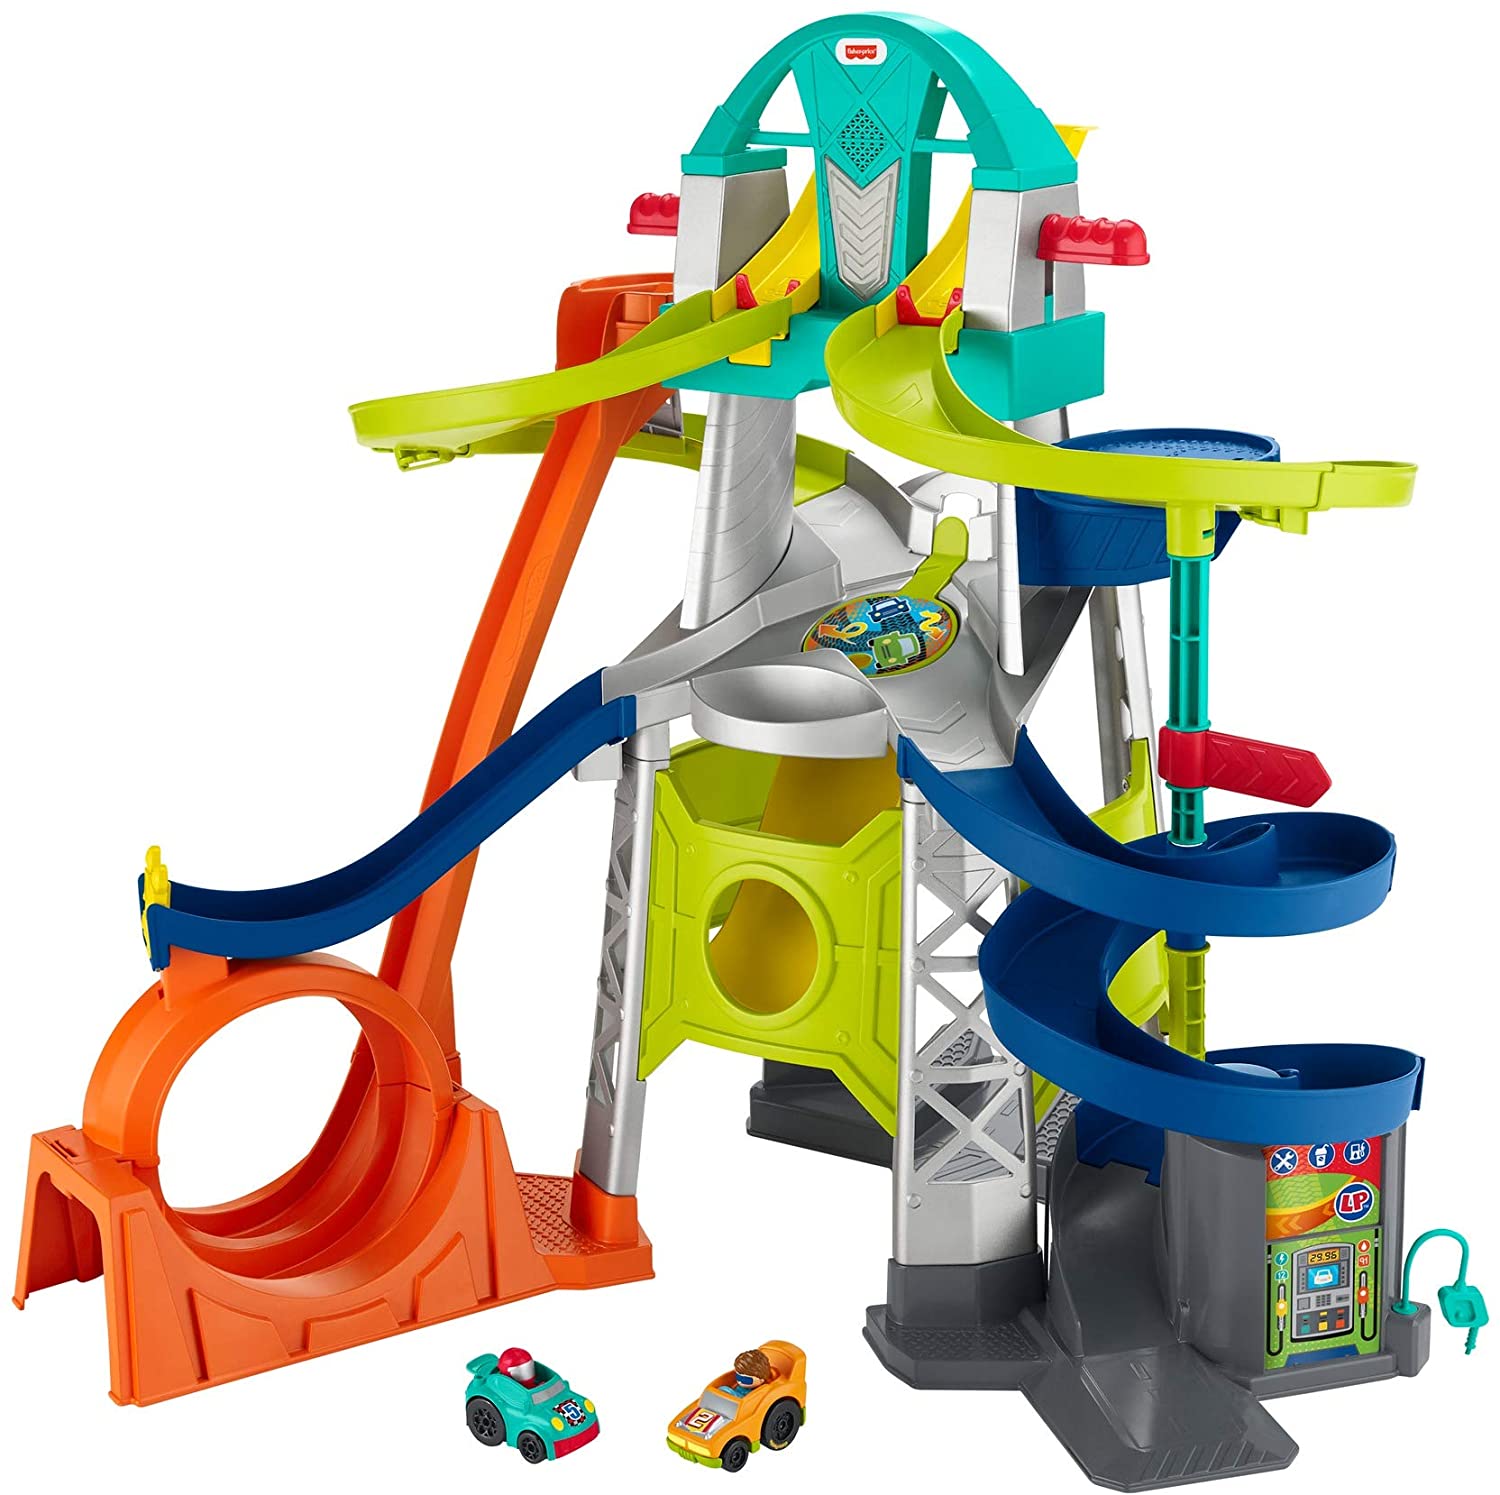 Fisher-Price Little People Launch and Loop Raceway Playset $32 + Free Shipping